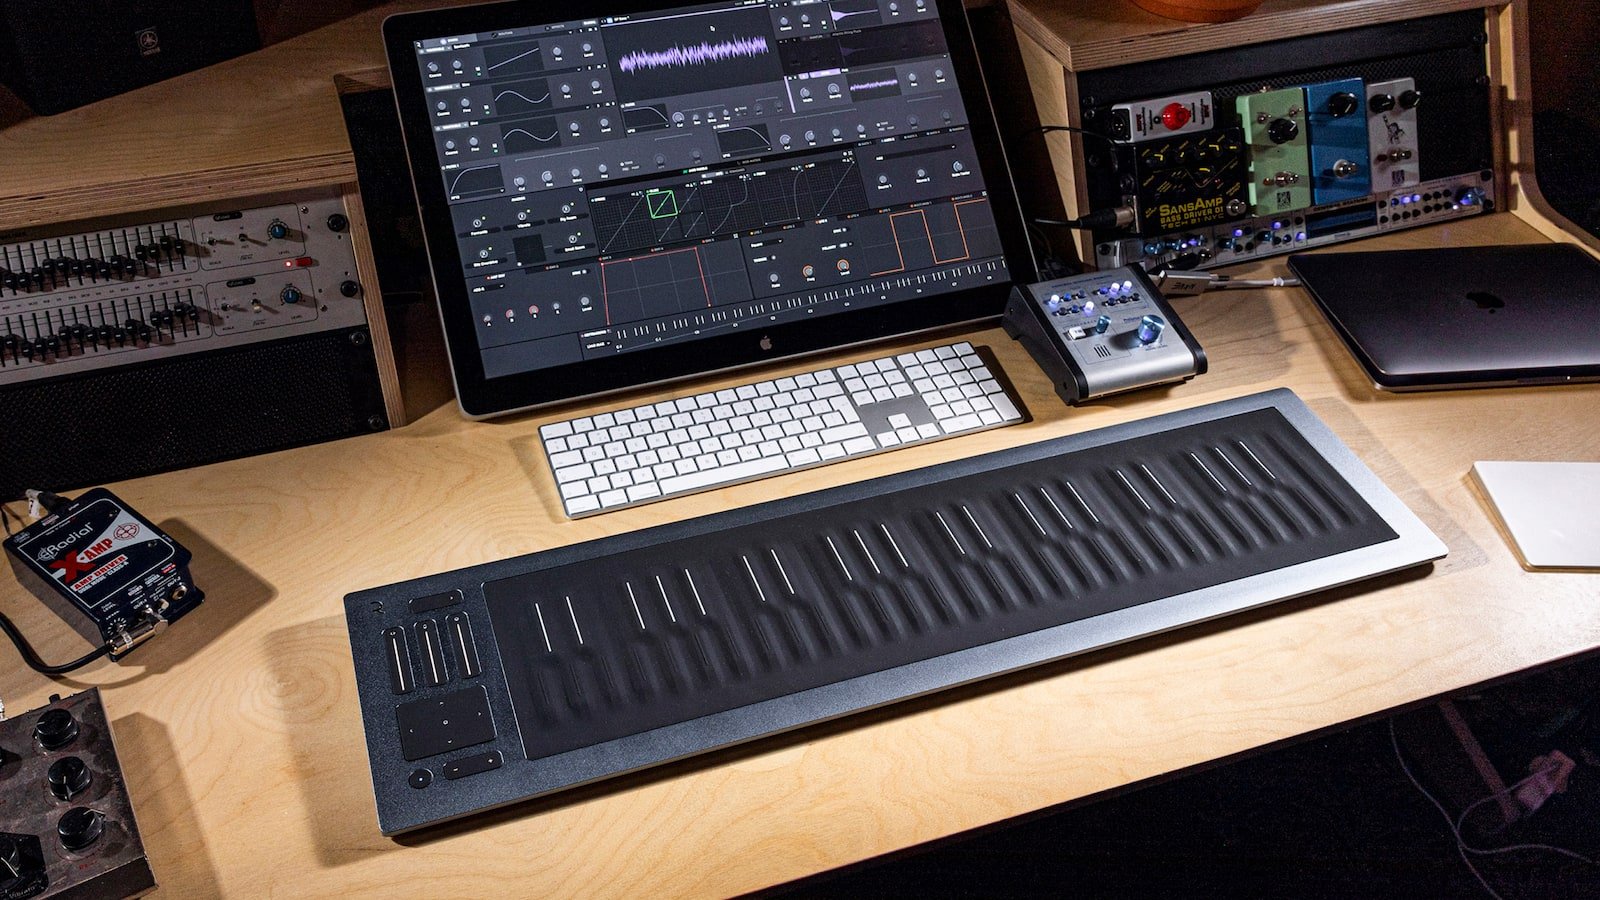 ROLI Seaboard RISE 2 versatile keyboard is easy to play and has an integrated battery